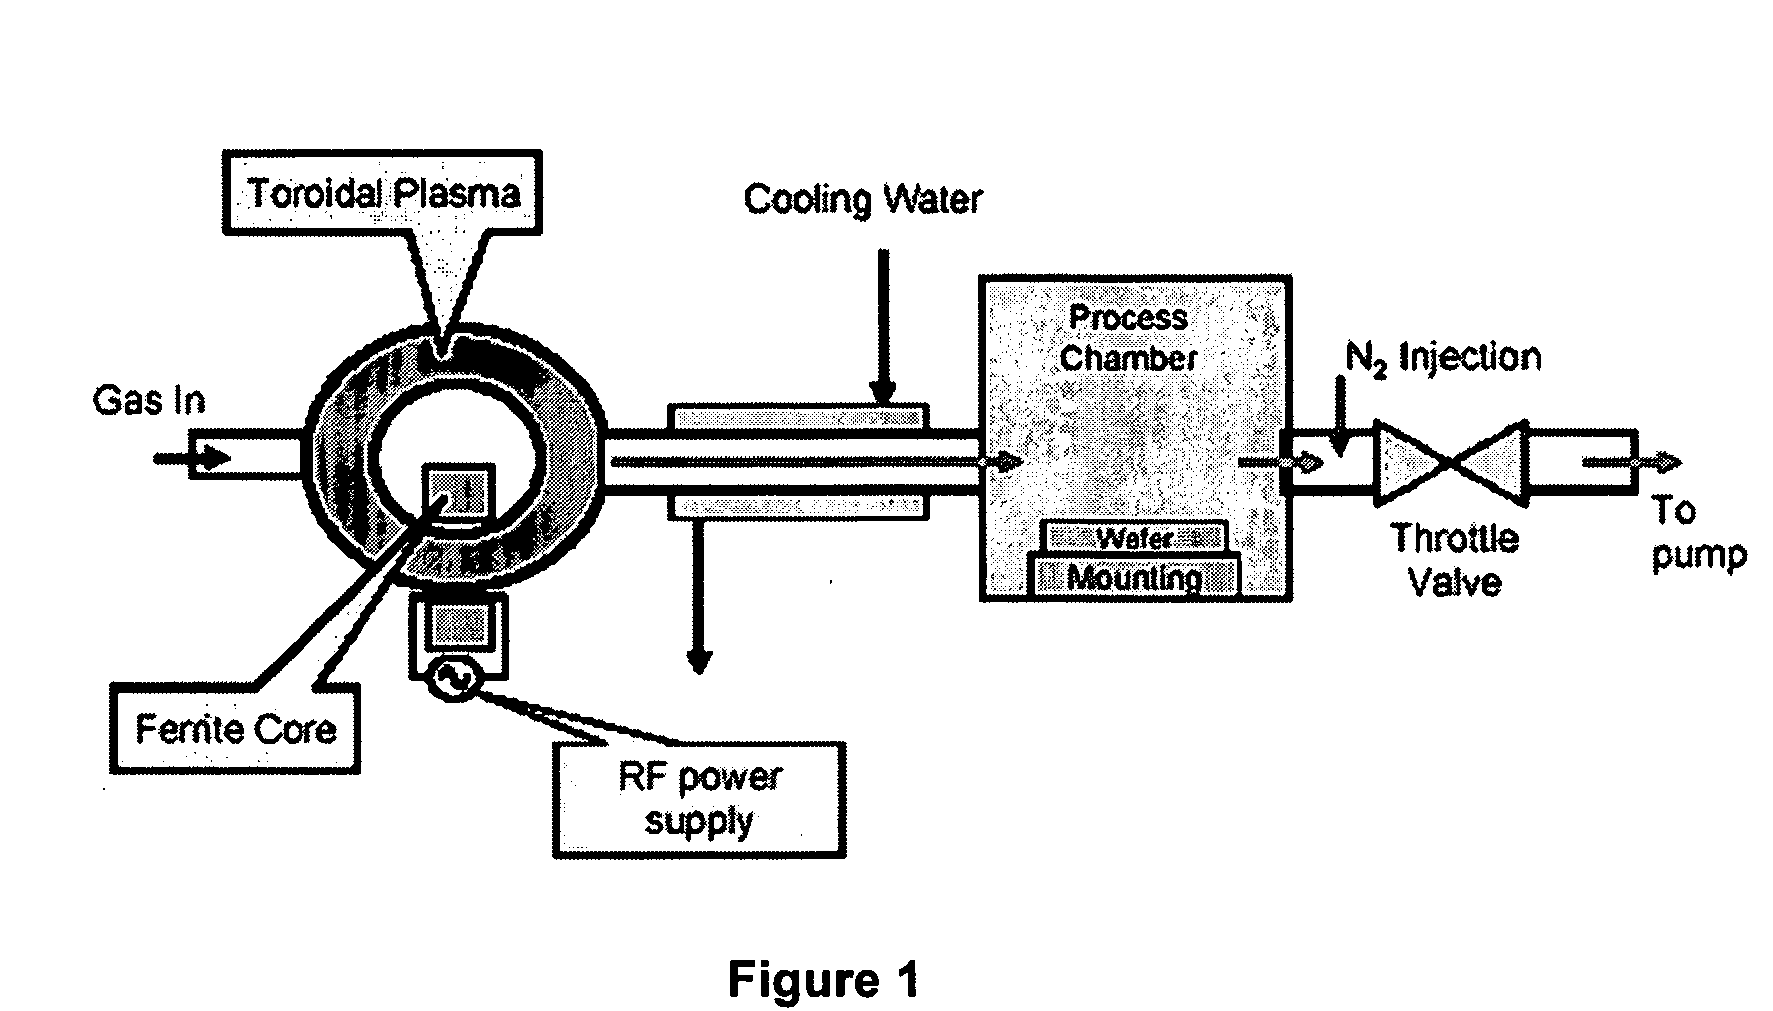 Remote chamber methods for removing surface deposits